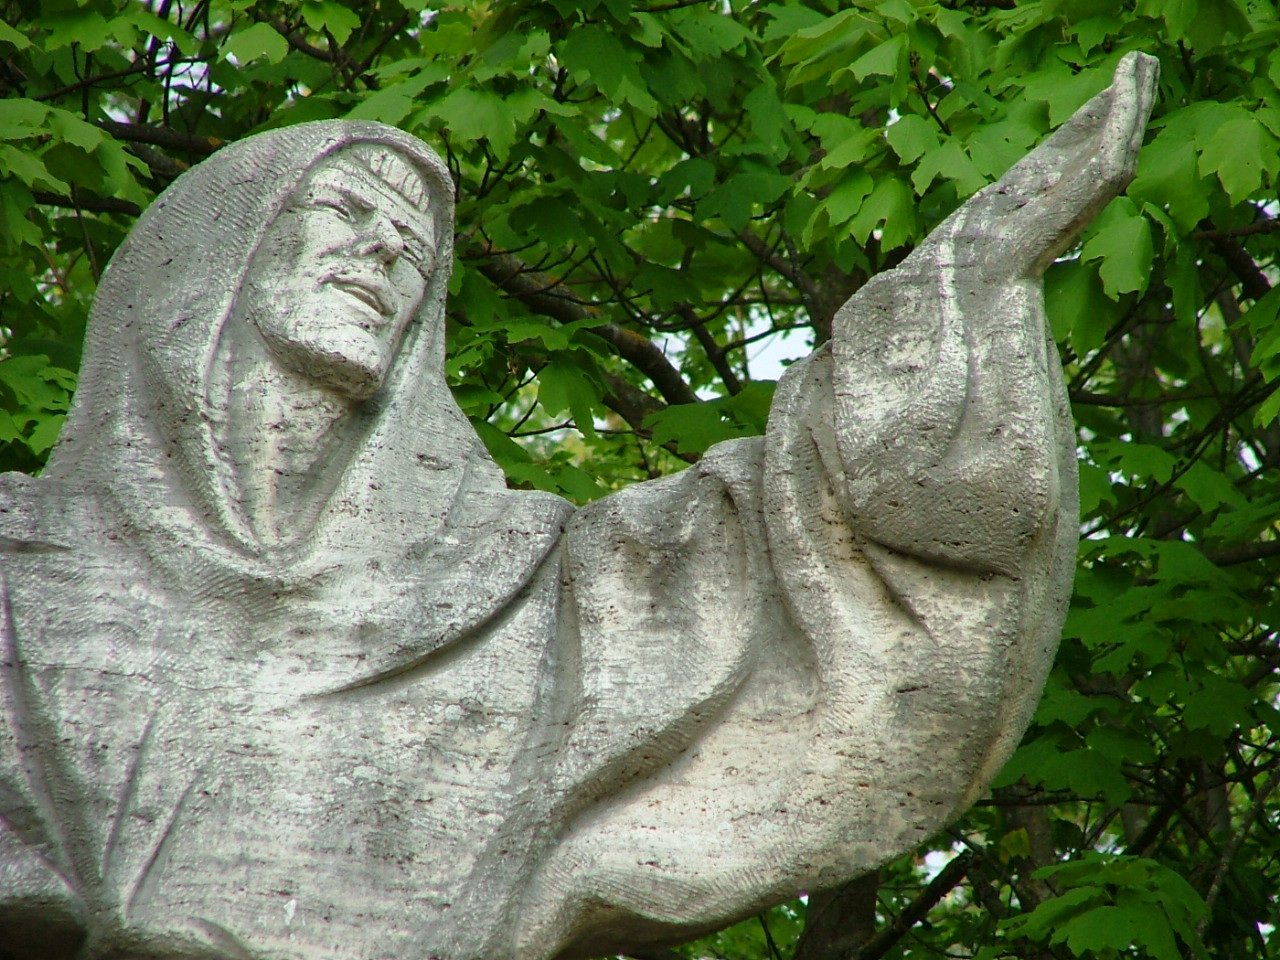 a stone statue of a person with a hood is in the middle of some nches